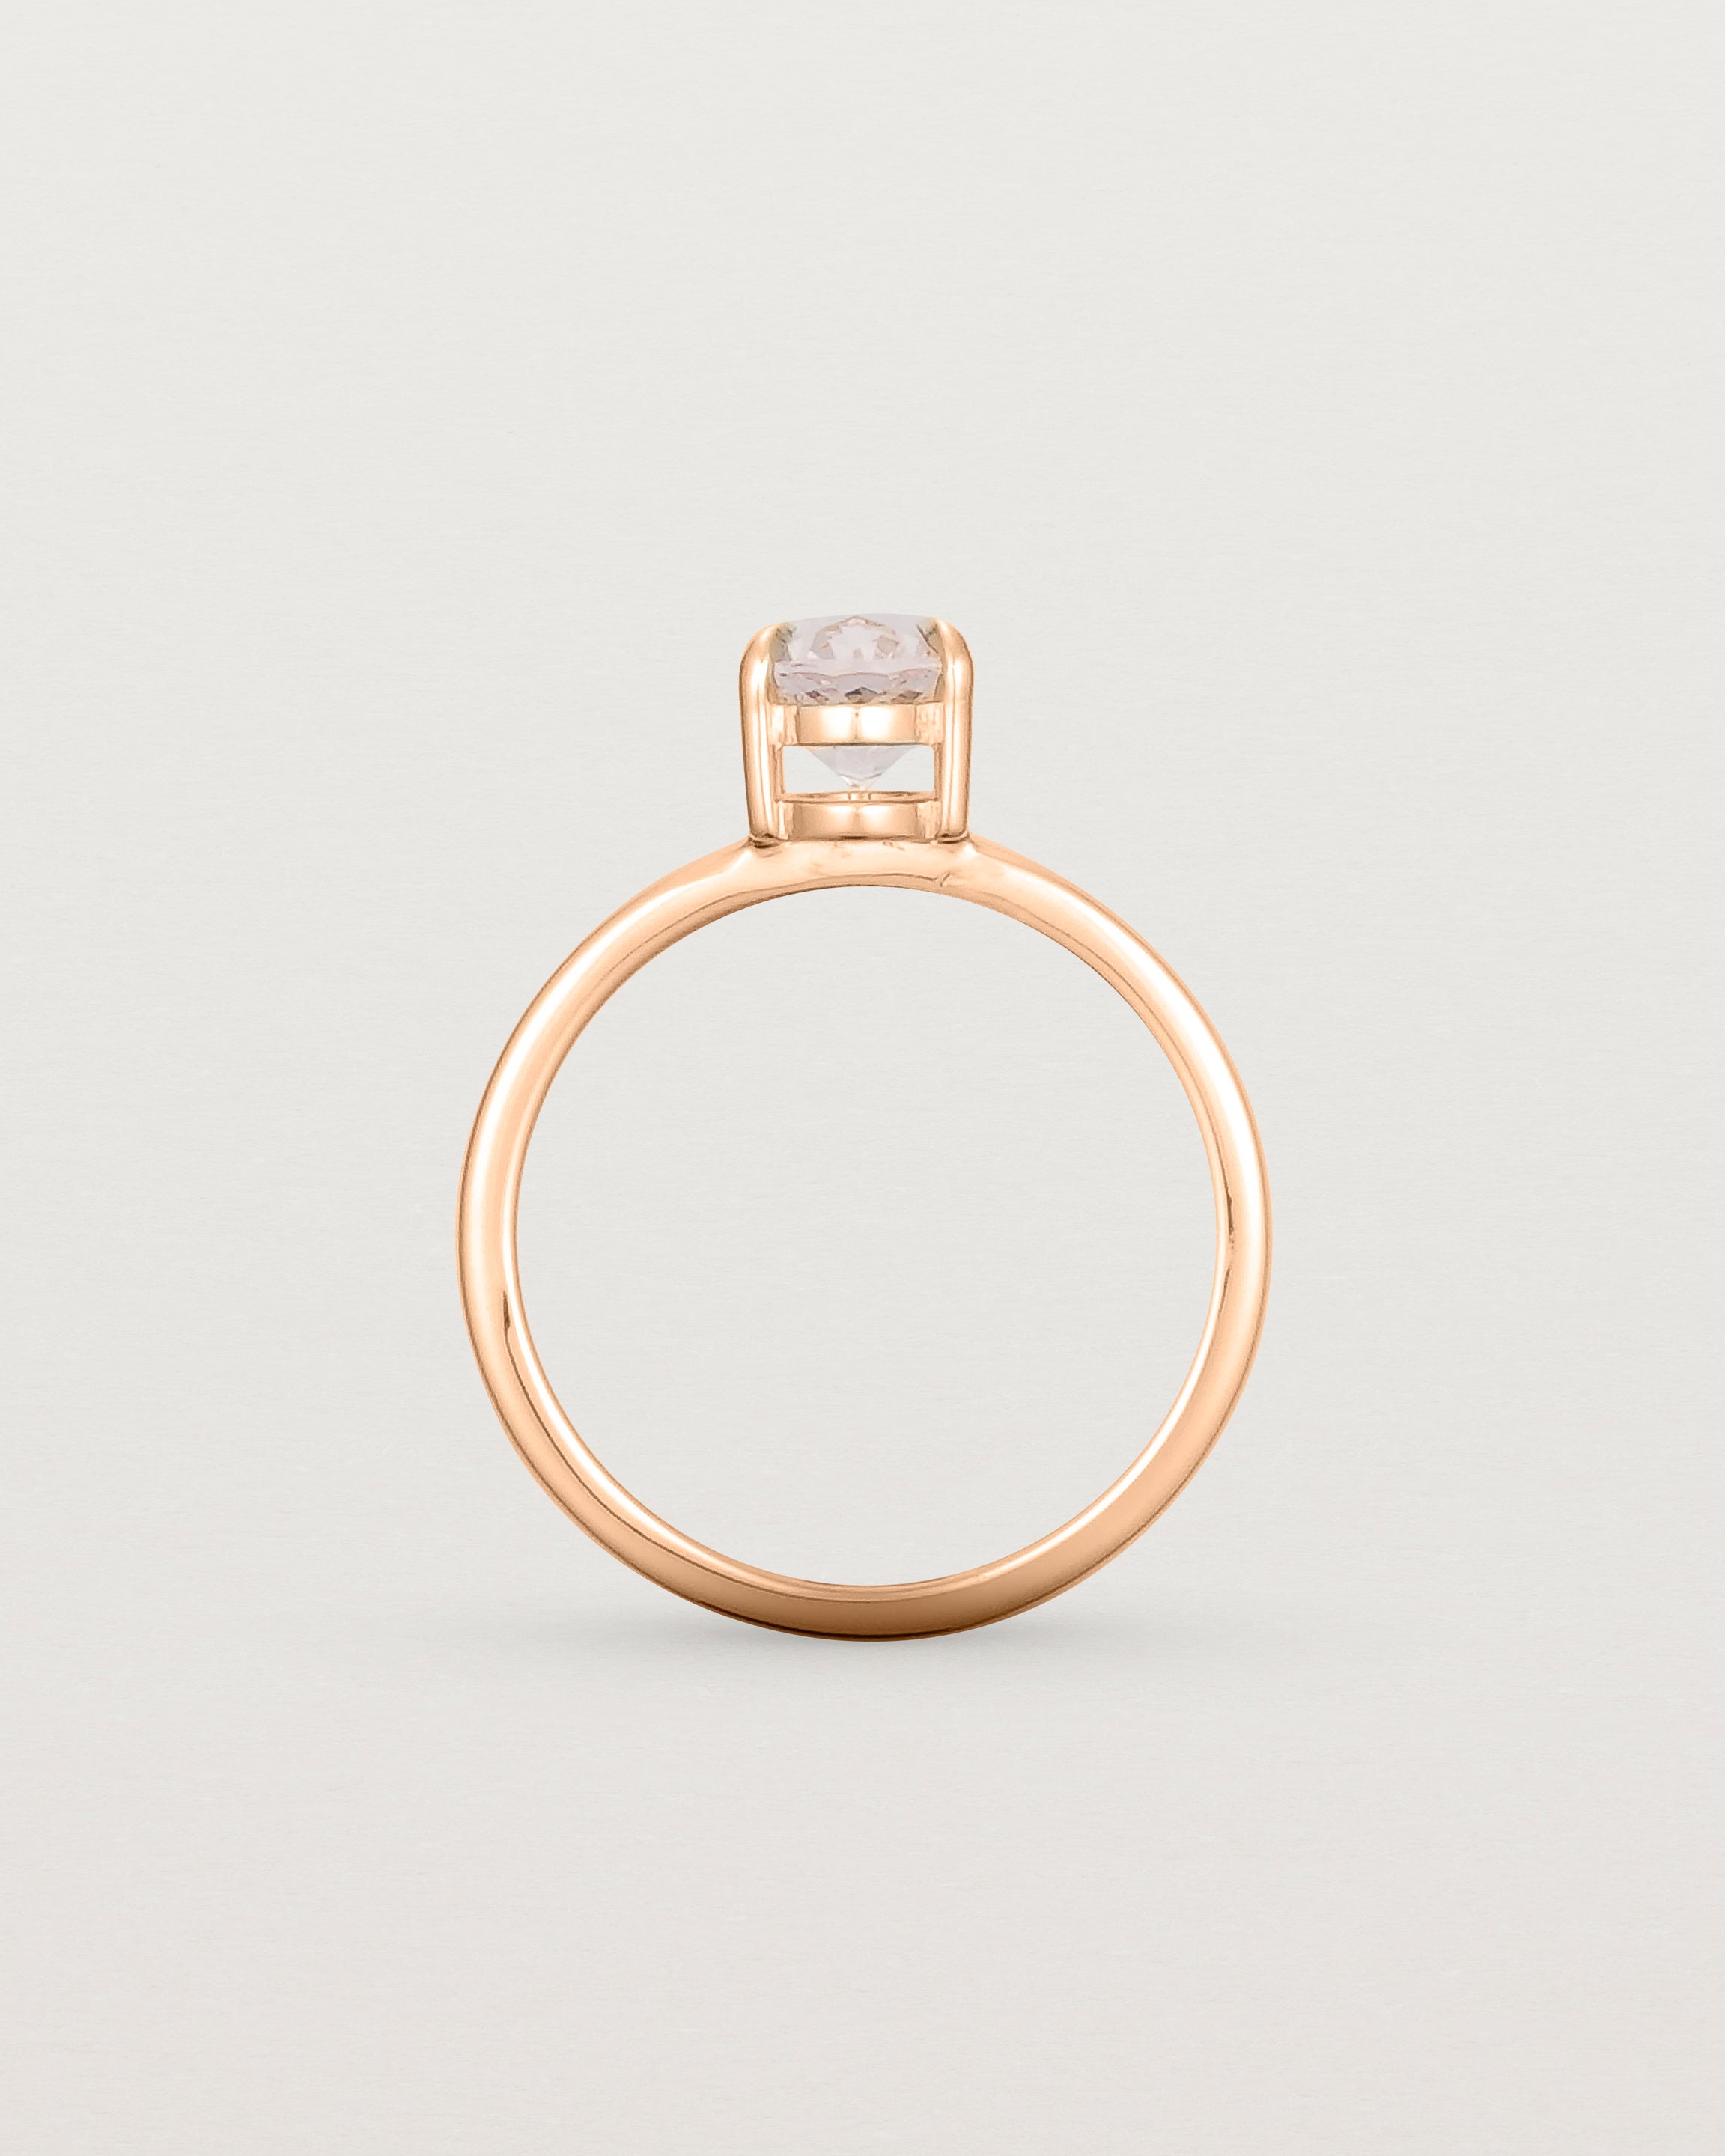 Standing view of the Una Oval Solitaire | Morganite | Rose Gold.